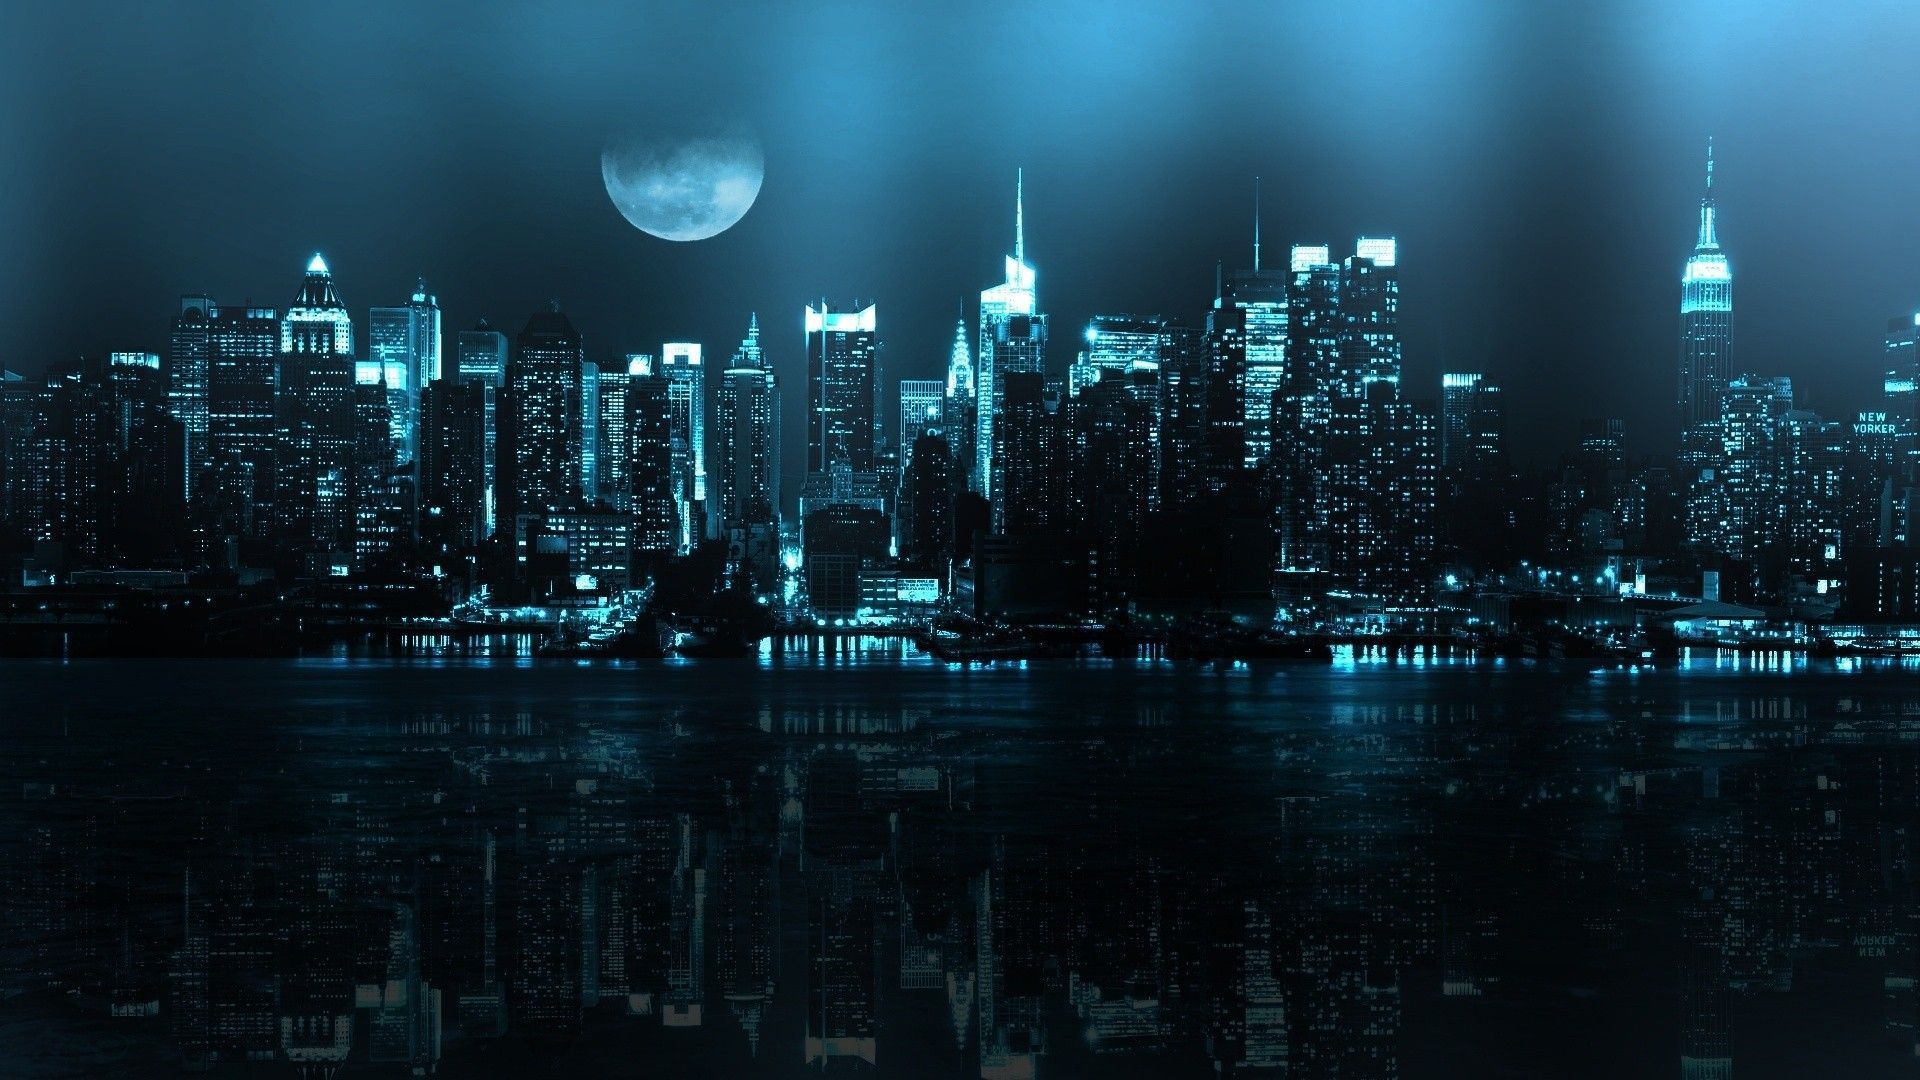 Moon over night city wallpapers and images - wallpapers, pictures ...